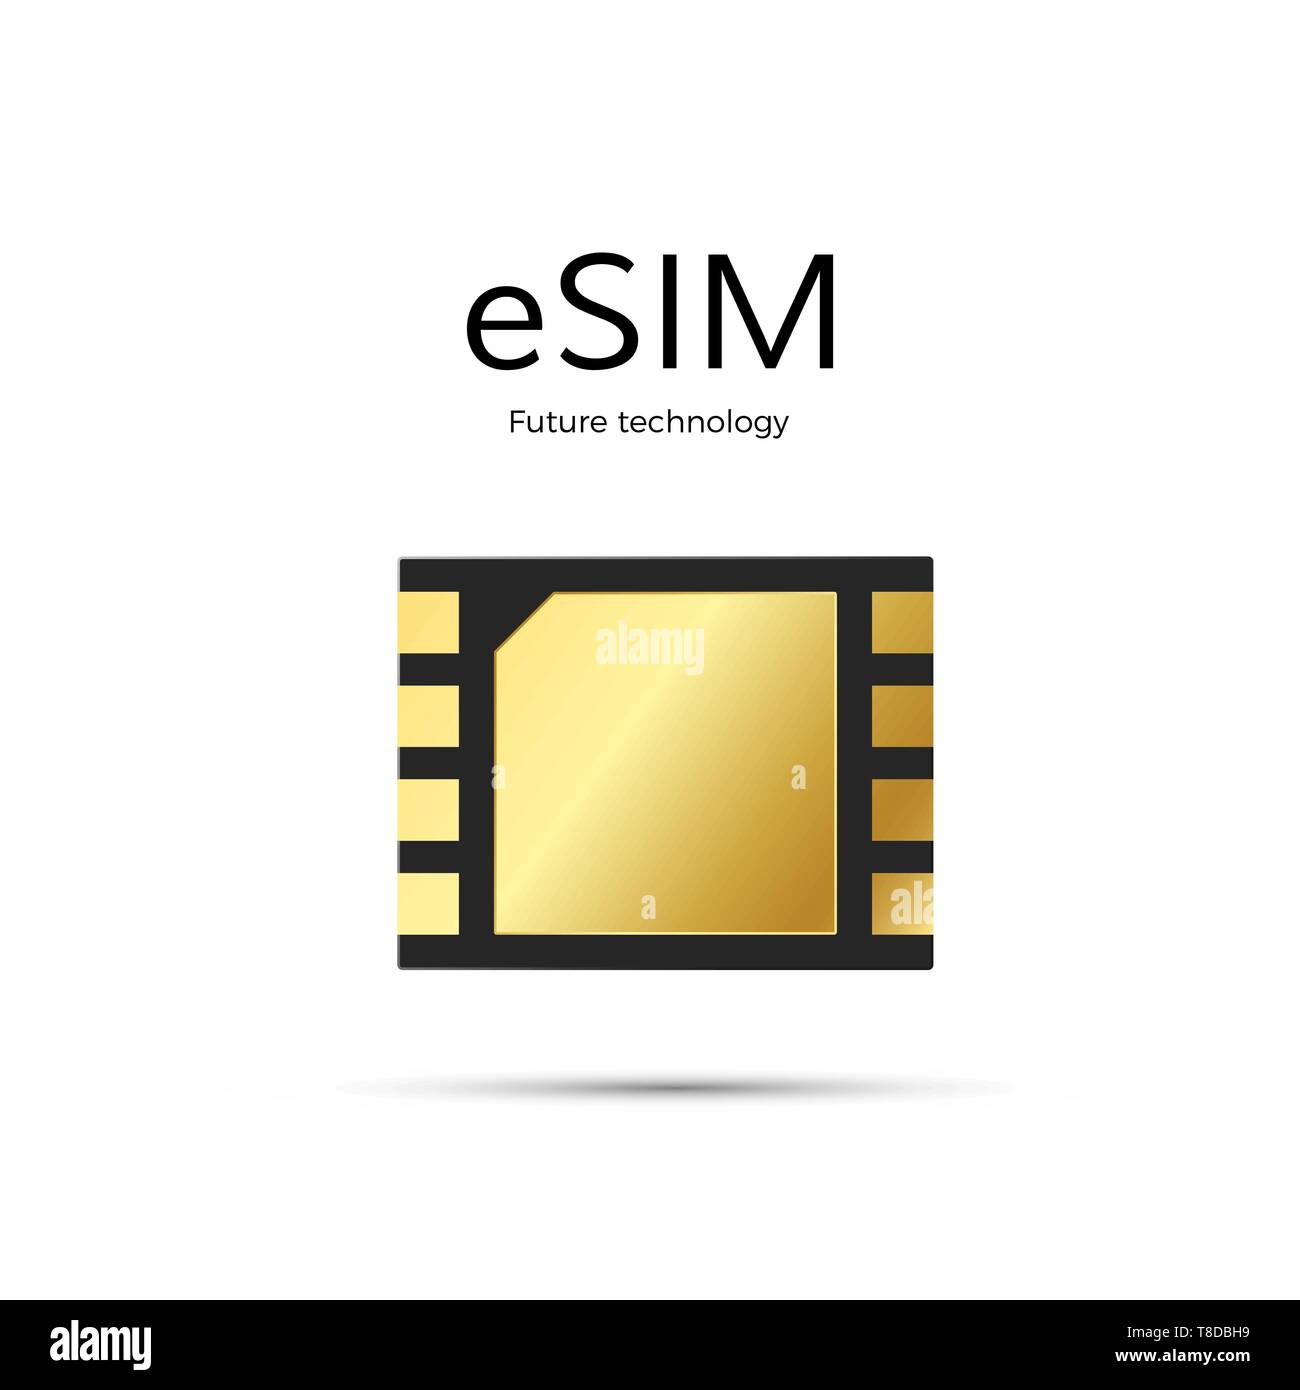 ESIM modern and tetechnology of future. Embedded SIM card icon symbol concept. gsm phone mobile network simcard. vector illustration isolated on white Stock Vector